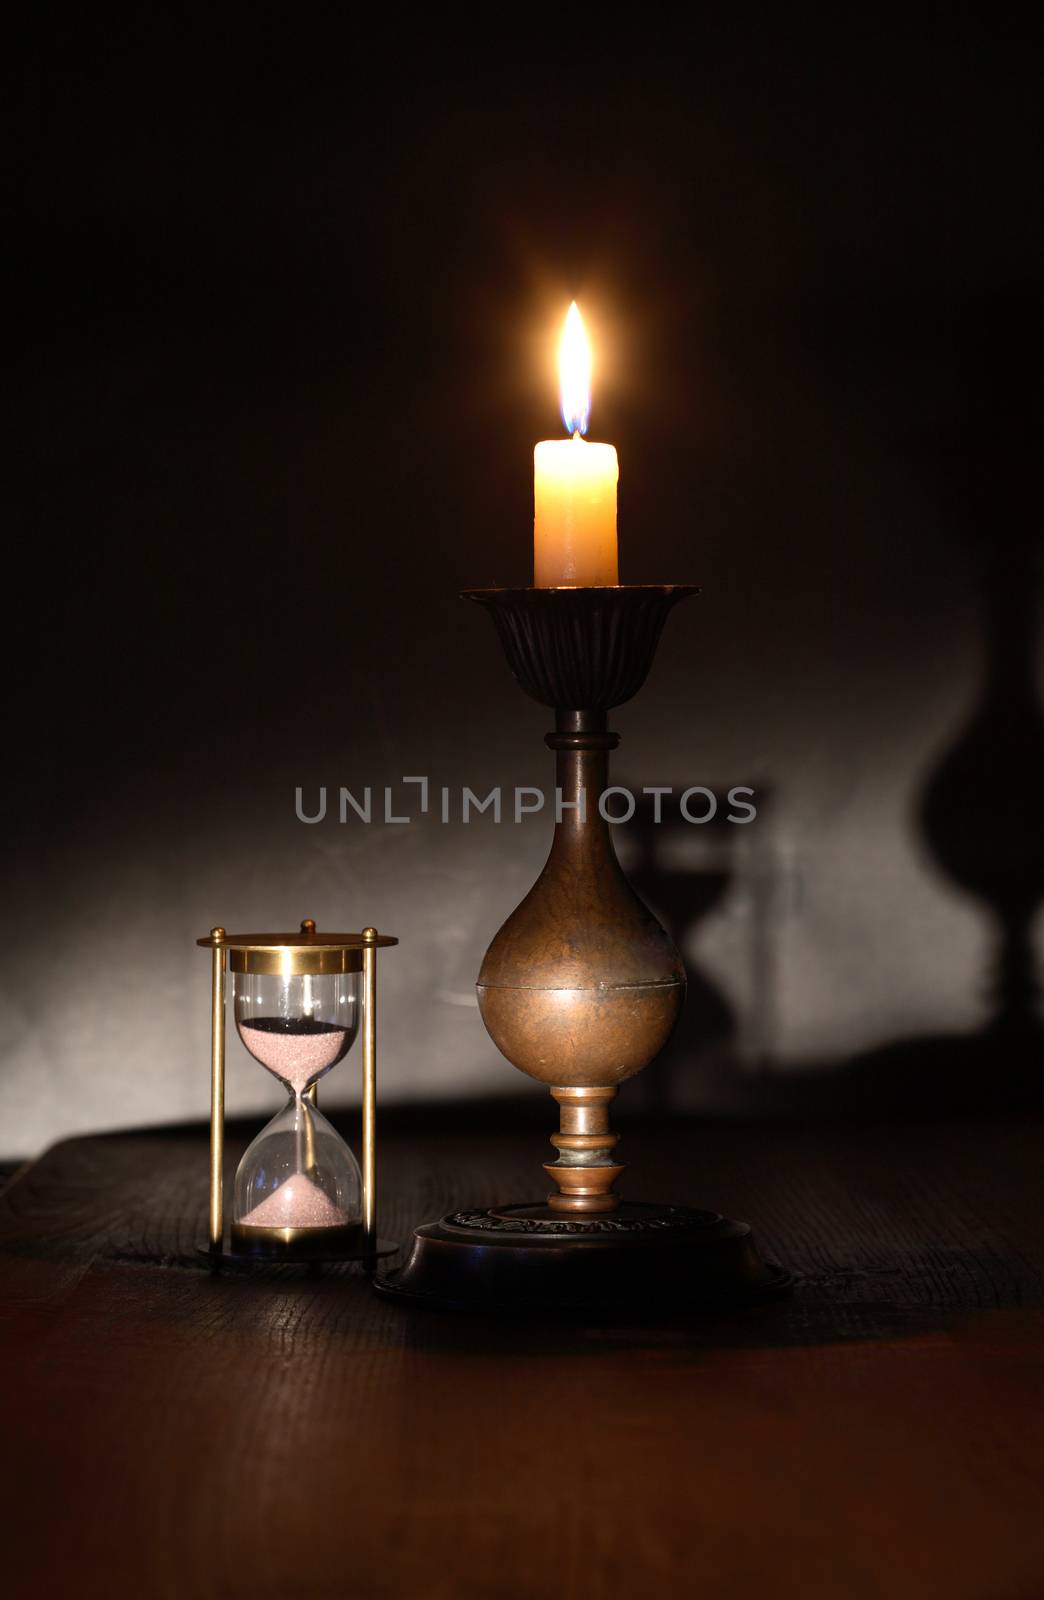 Elegant brass candlestick with lighting candle near hourglass on dark background